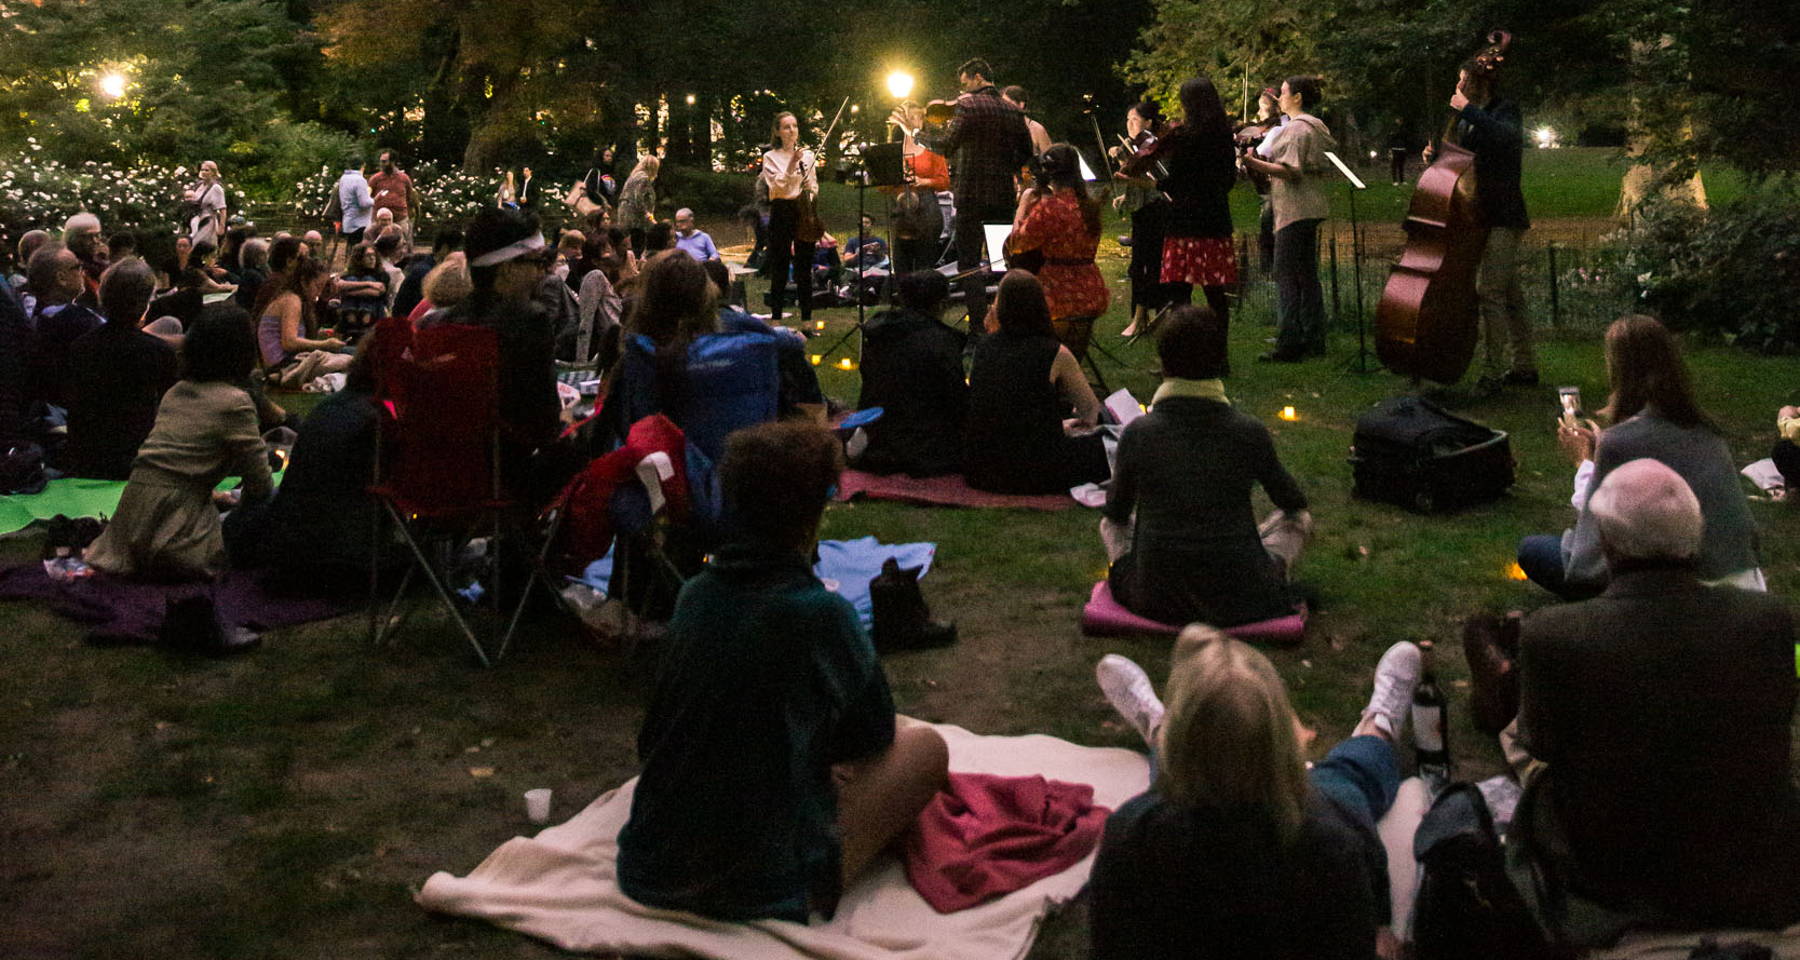 Clair De Lune: Night Music for Strings @ Central Park